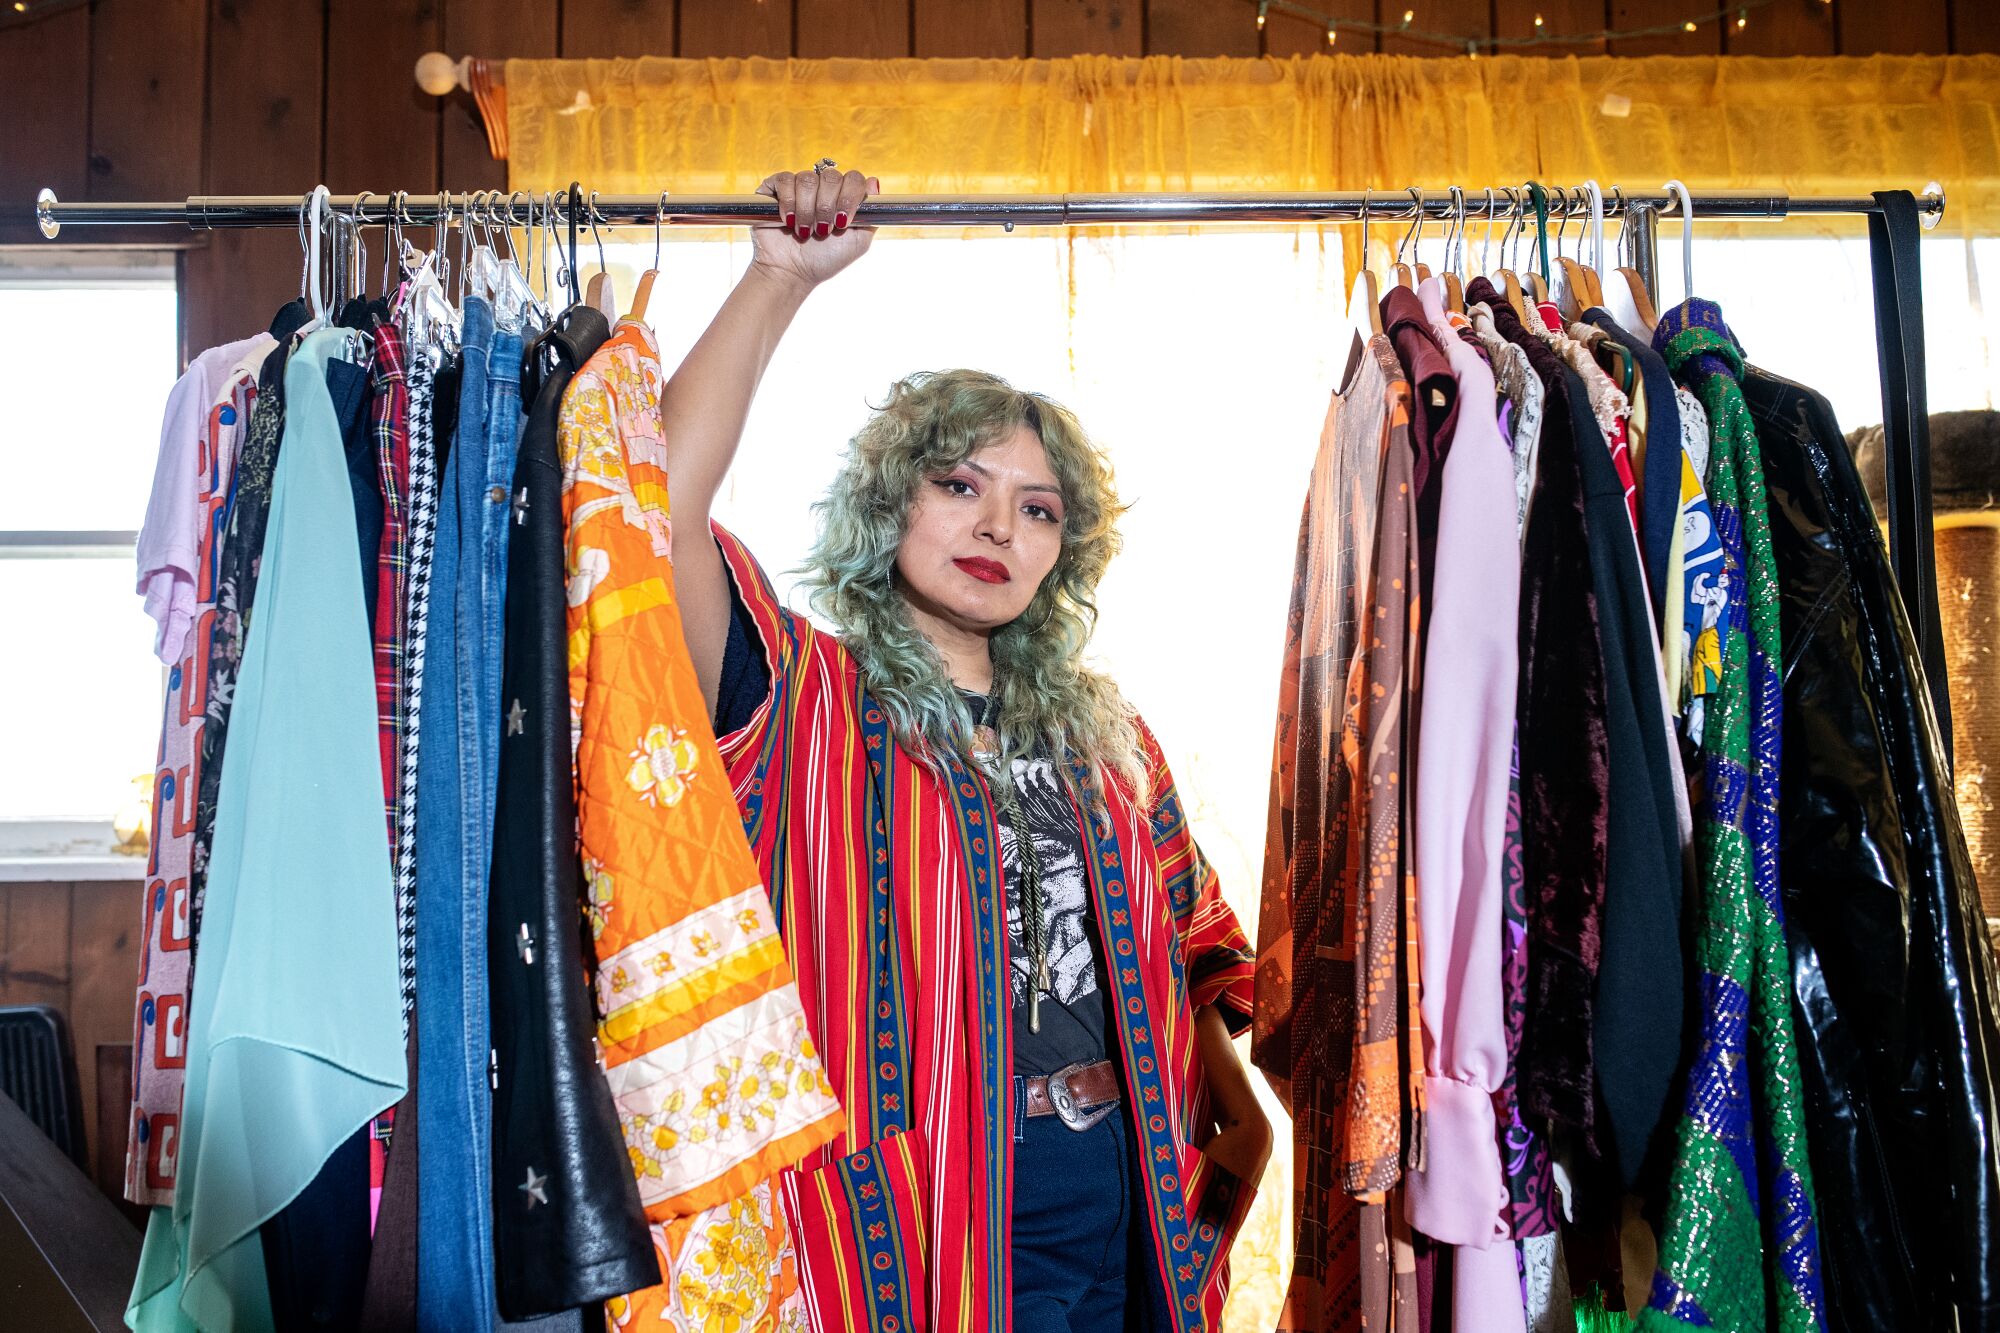 Rebecca Recinos wears a vintage patterned kimono and rests her hand on the bar of a clothing rack